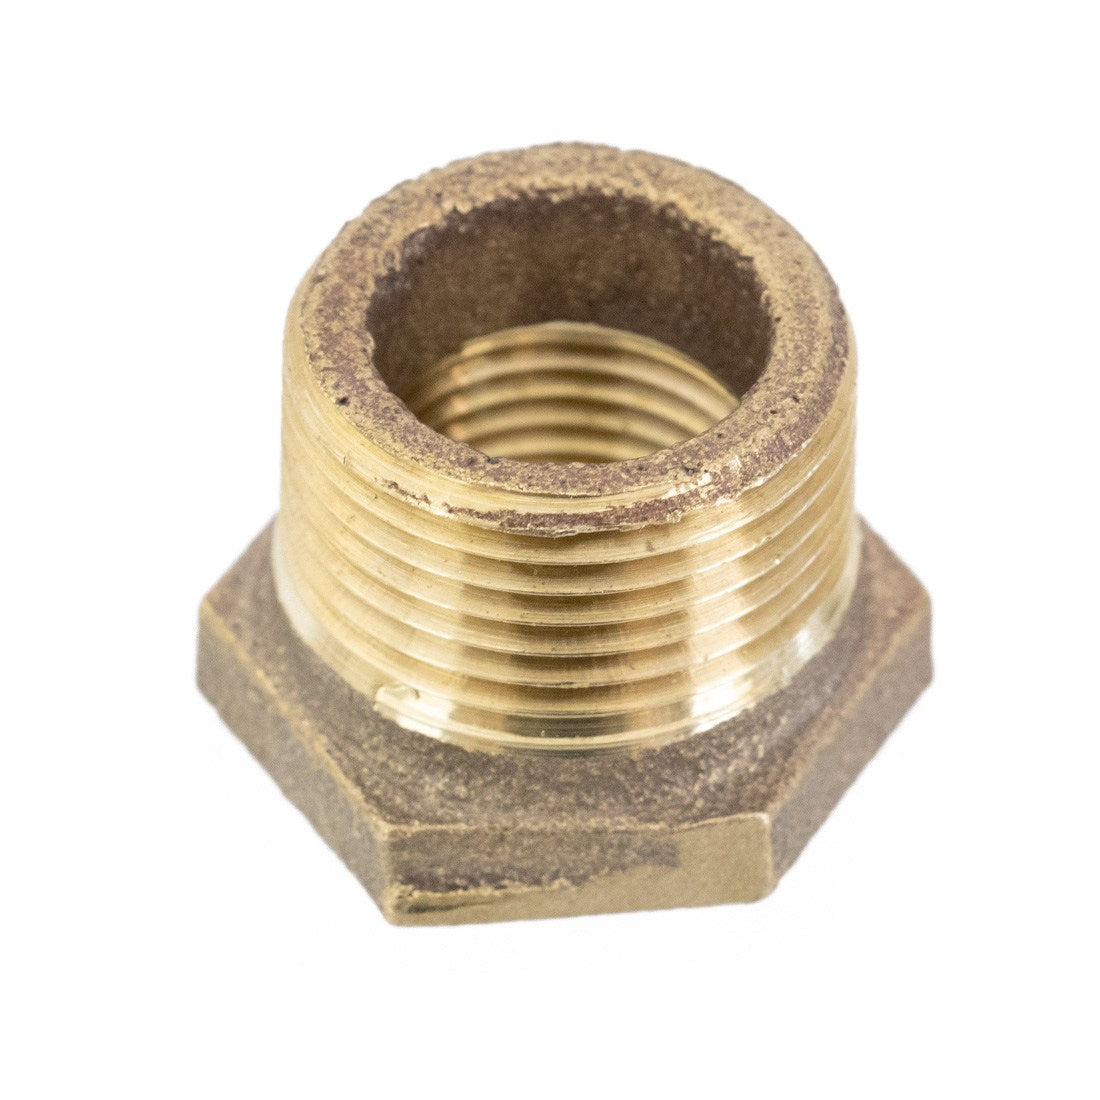 PWP Brass Fitting - Hex Bushing 1/2 Female NPT x 3/4 Male NPT Top Angle View